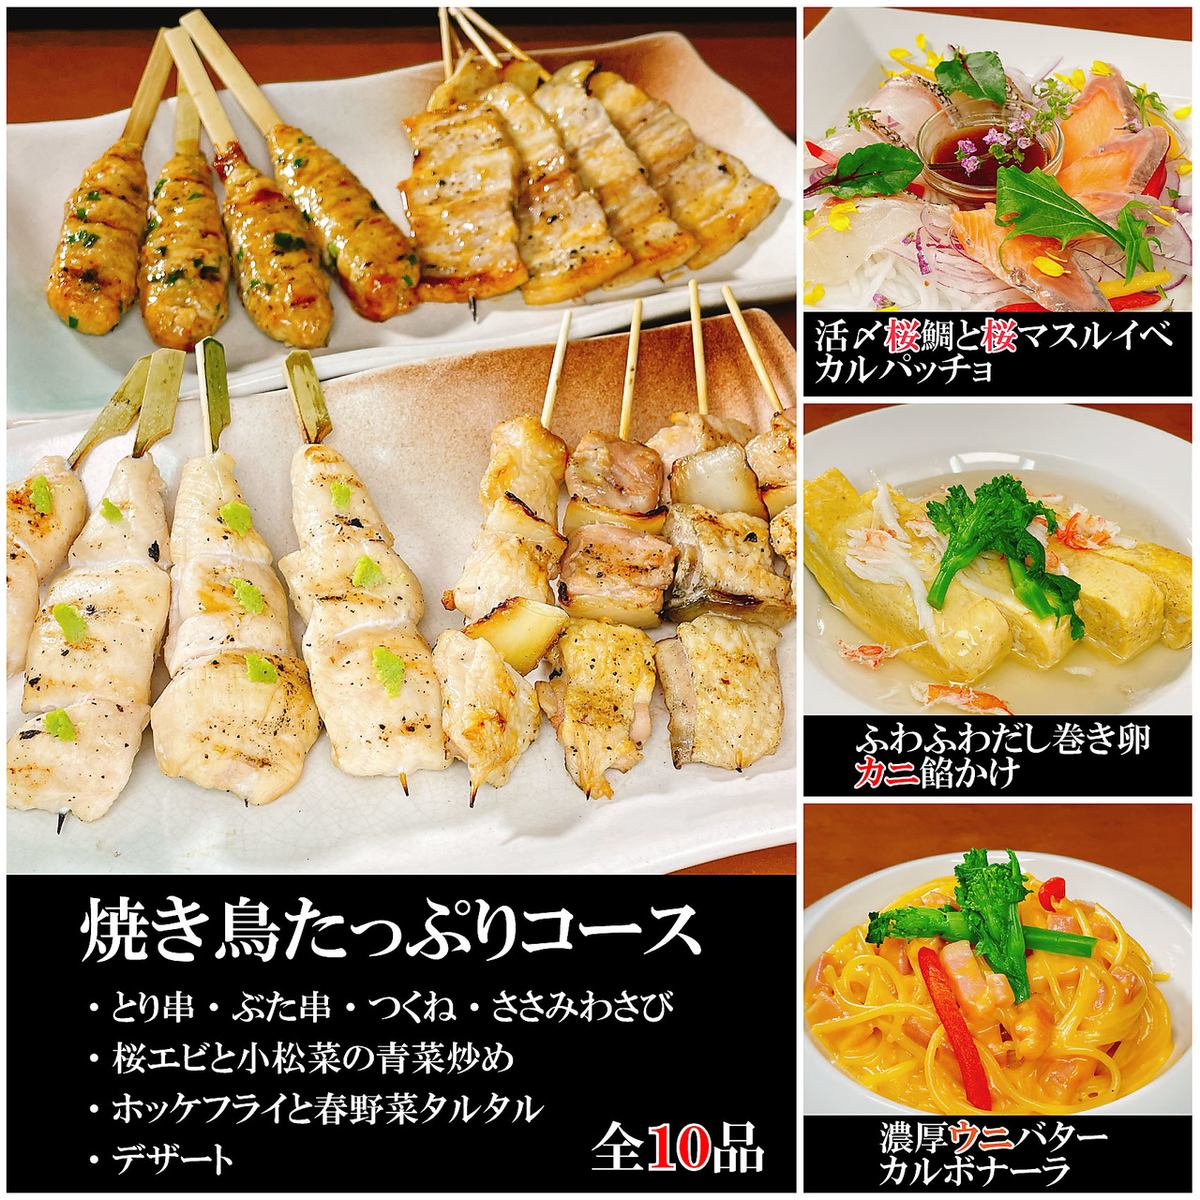 Toritaro's signature yakitori course! From 4,000 yen including 150 minutes of all-you-can-drink!